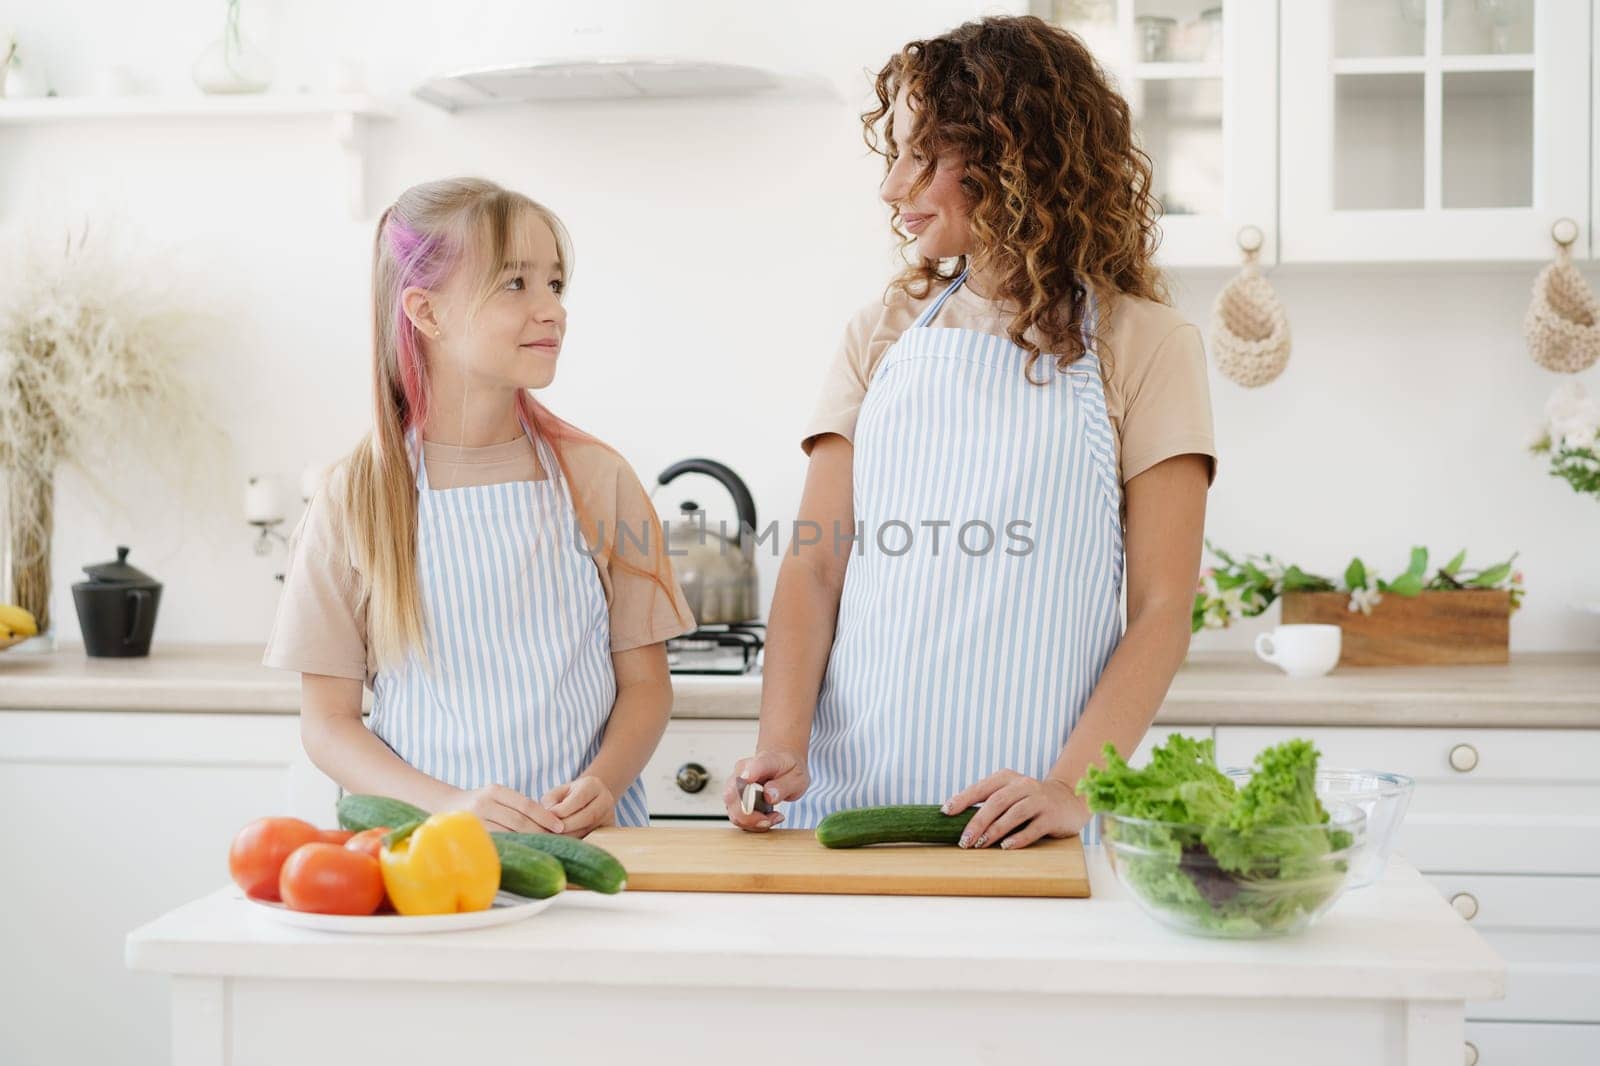 Mother and teen daughter preparing vegetable salad at kitchen, close up